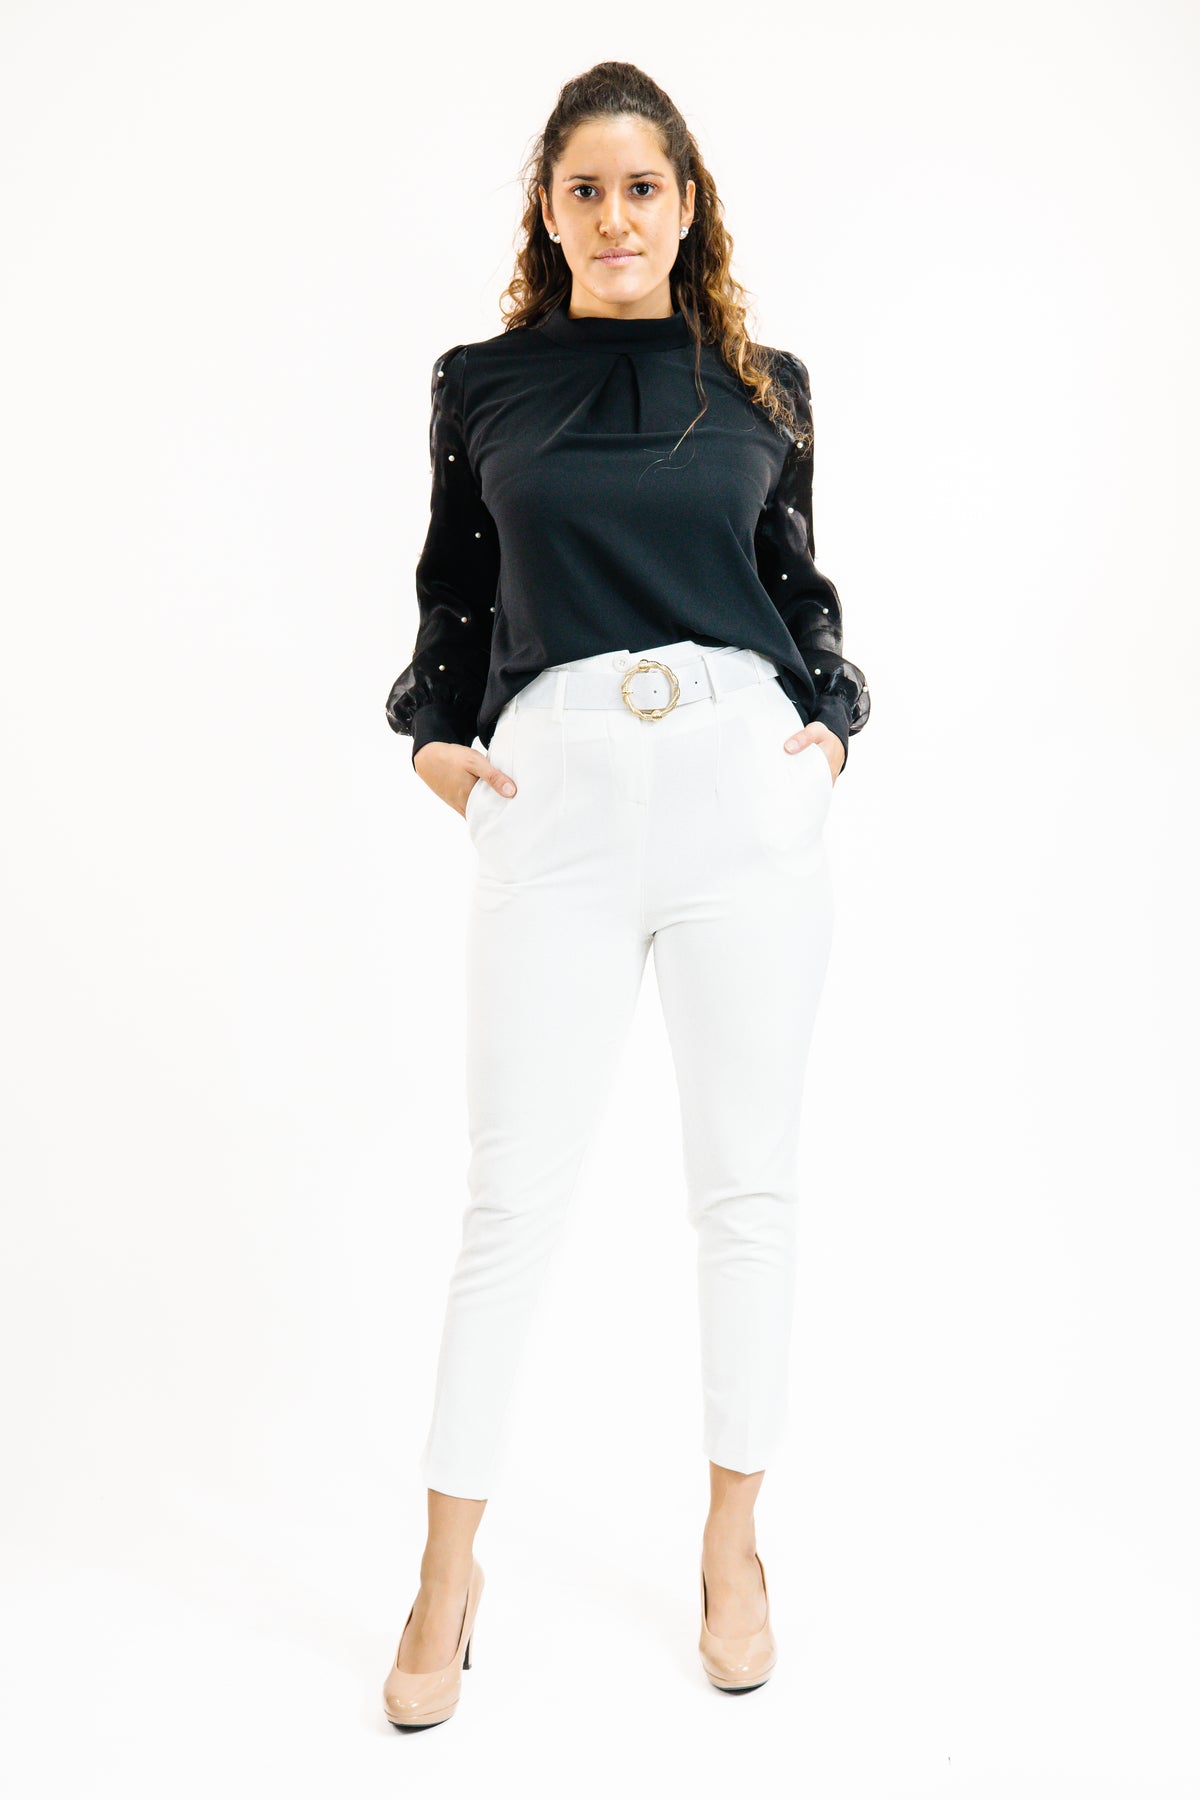 Fearless Black blouse